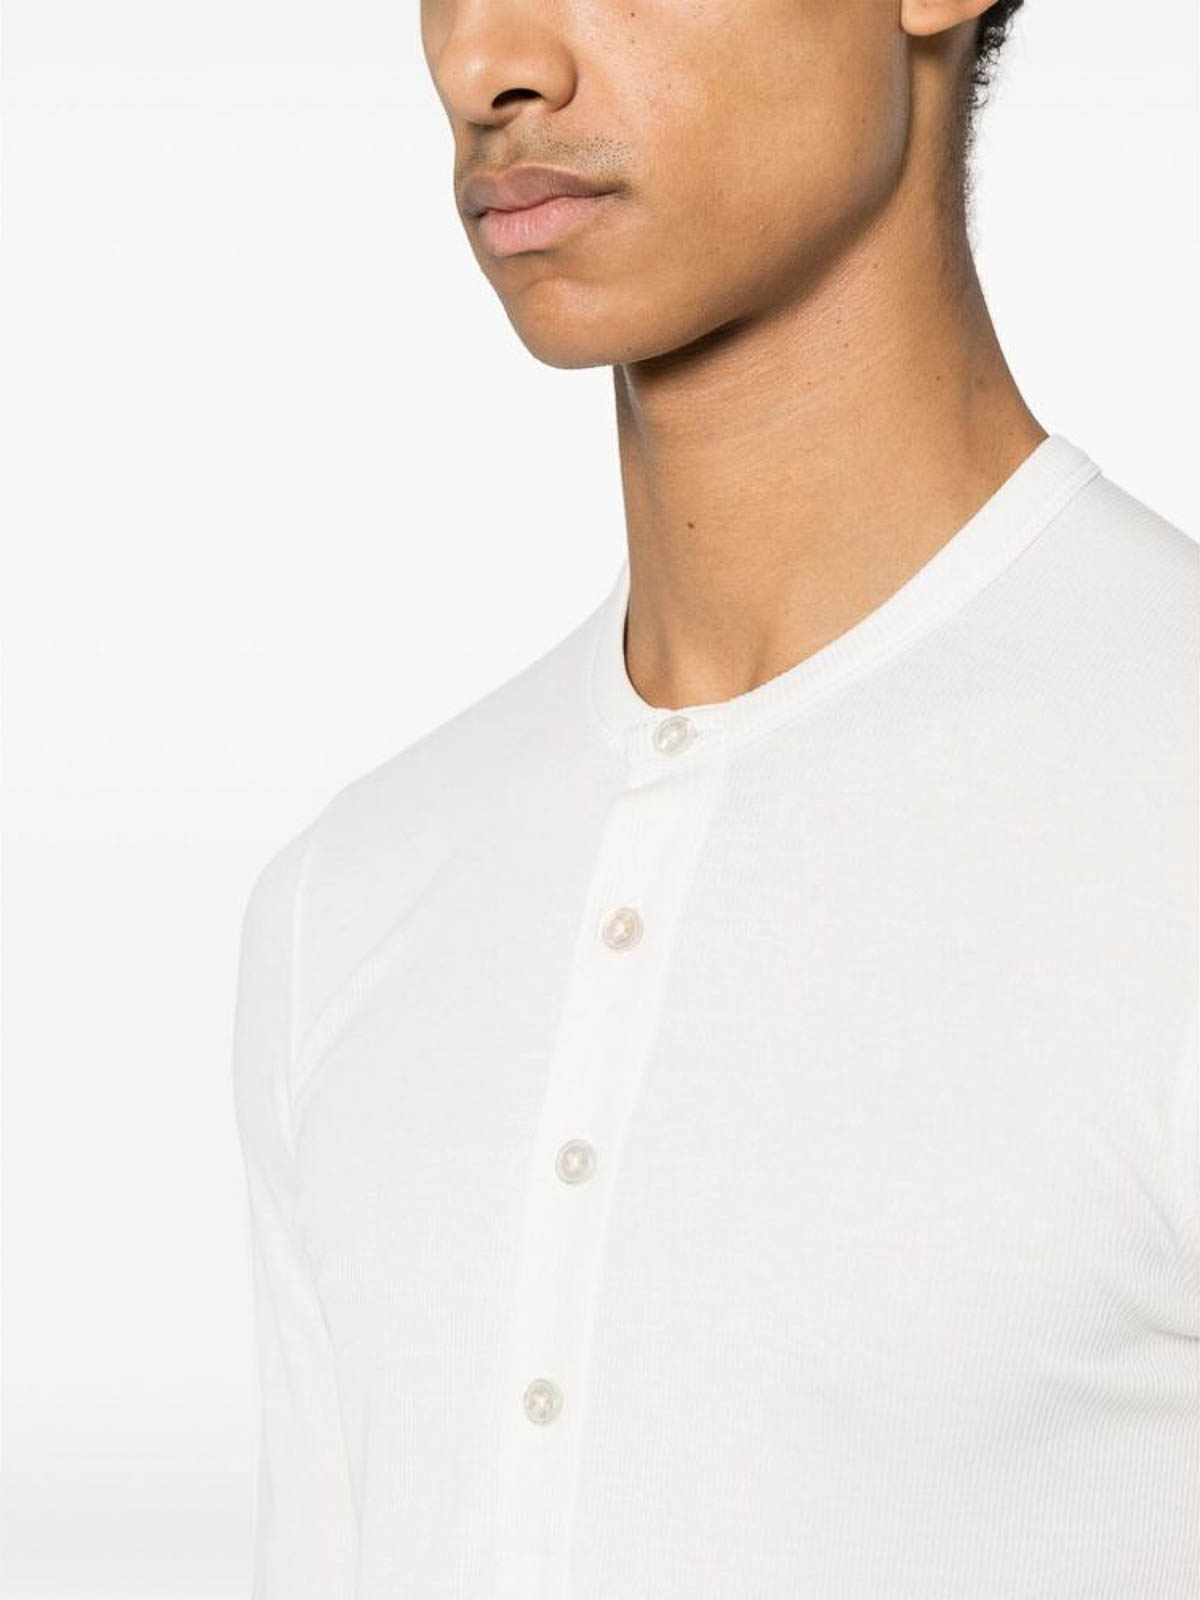 Shop Tom Ford Off-white Henley Sweater